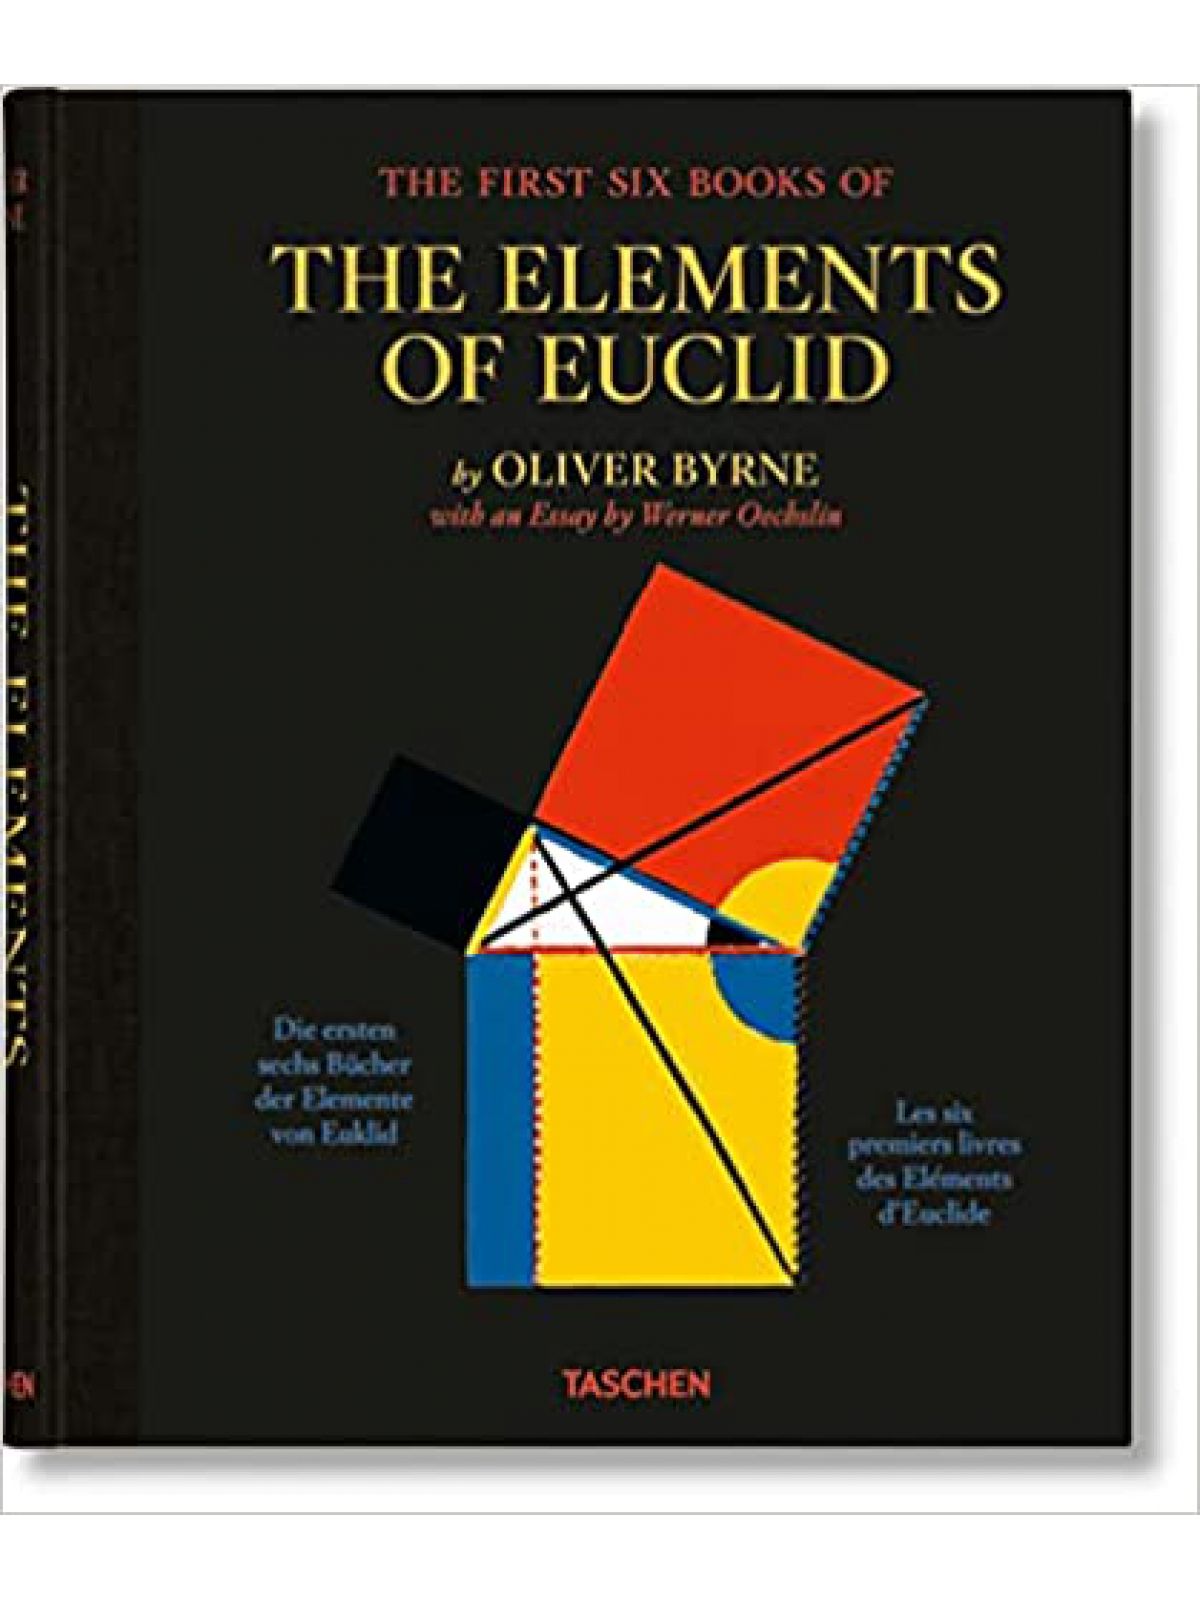 OLIVER BYRNE. THE FIRST SIX BOOKS OF THE ELEMENTS OF EUCLID  Купить Книгу на Английском